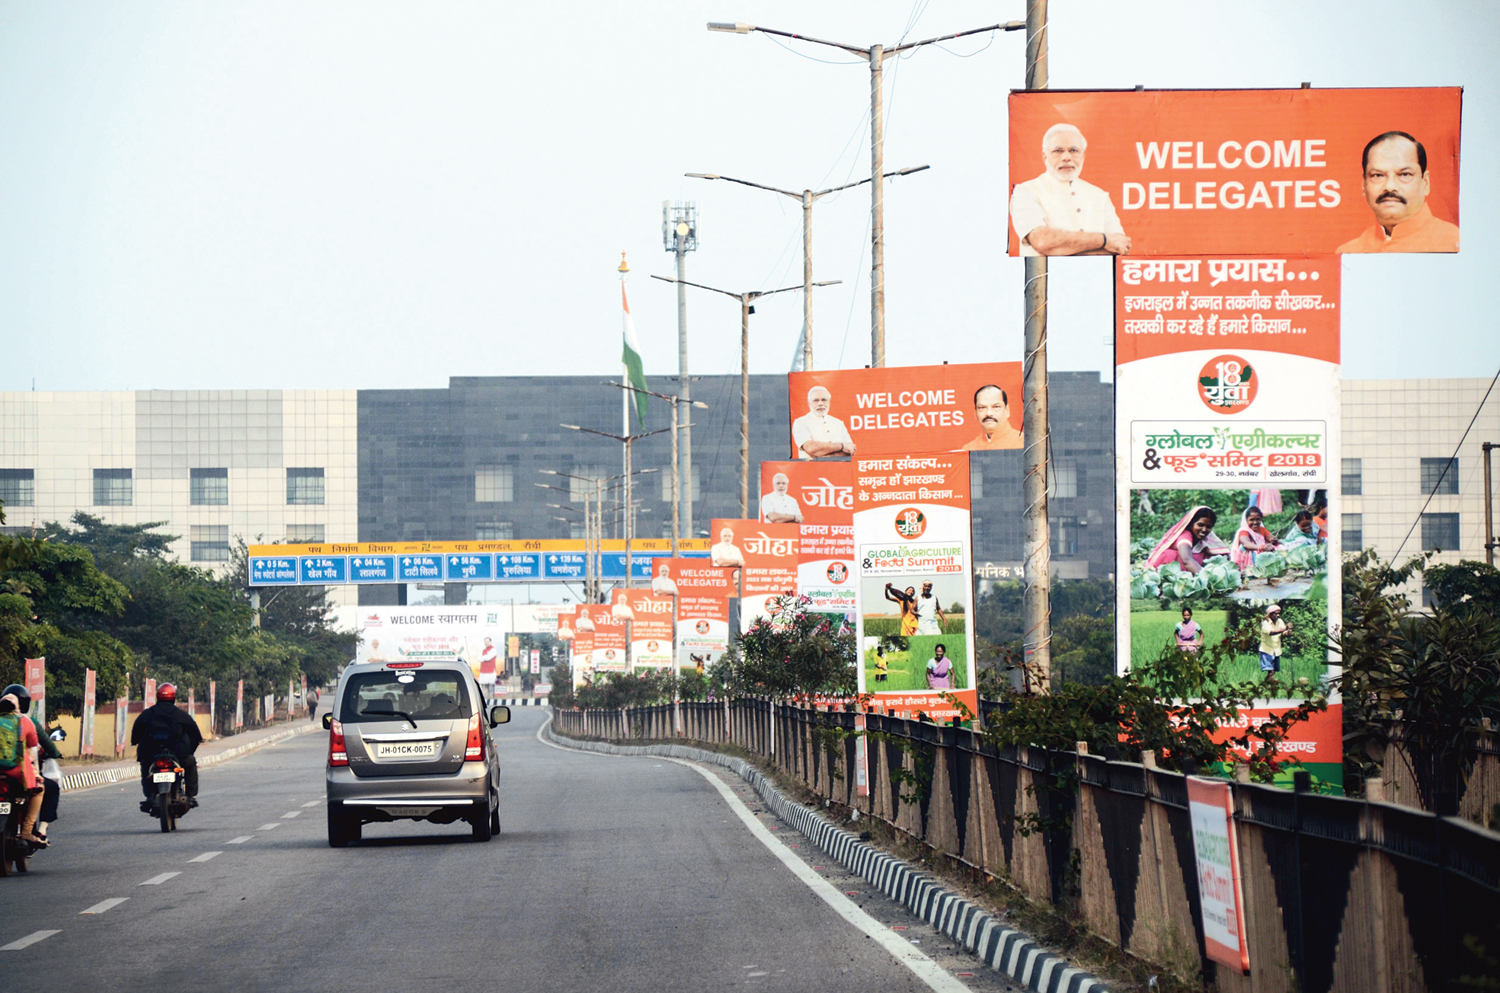 Billboards and placards on the road leading to the Hotwar mega sports complex from Khelgaon Chowk in Ranchi on Wednesday welcome delegates to the two-day Global Agriculture & Food Summit. 